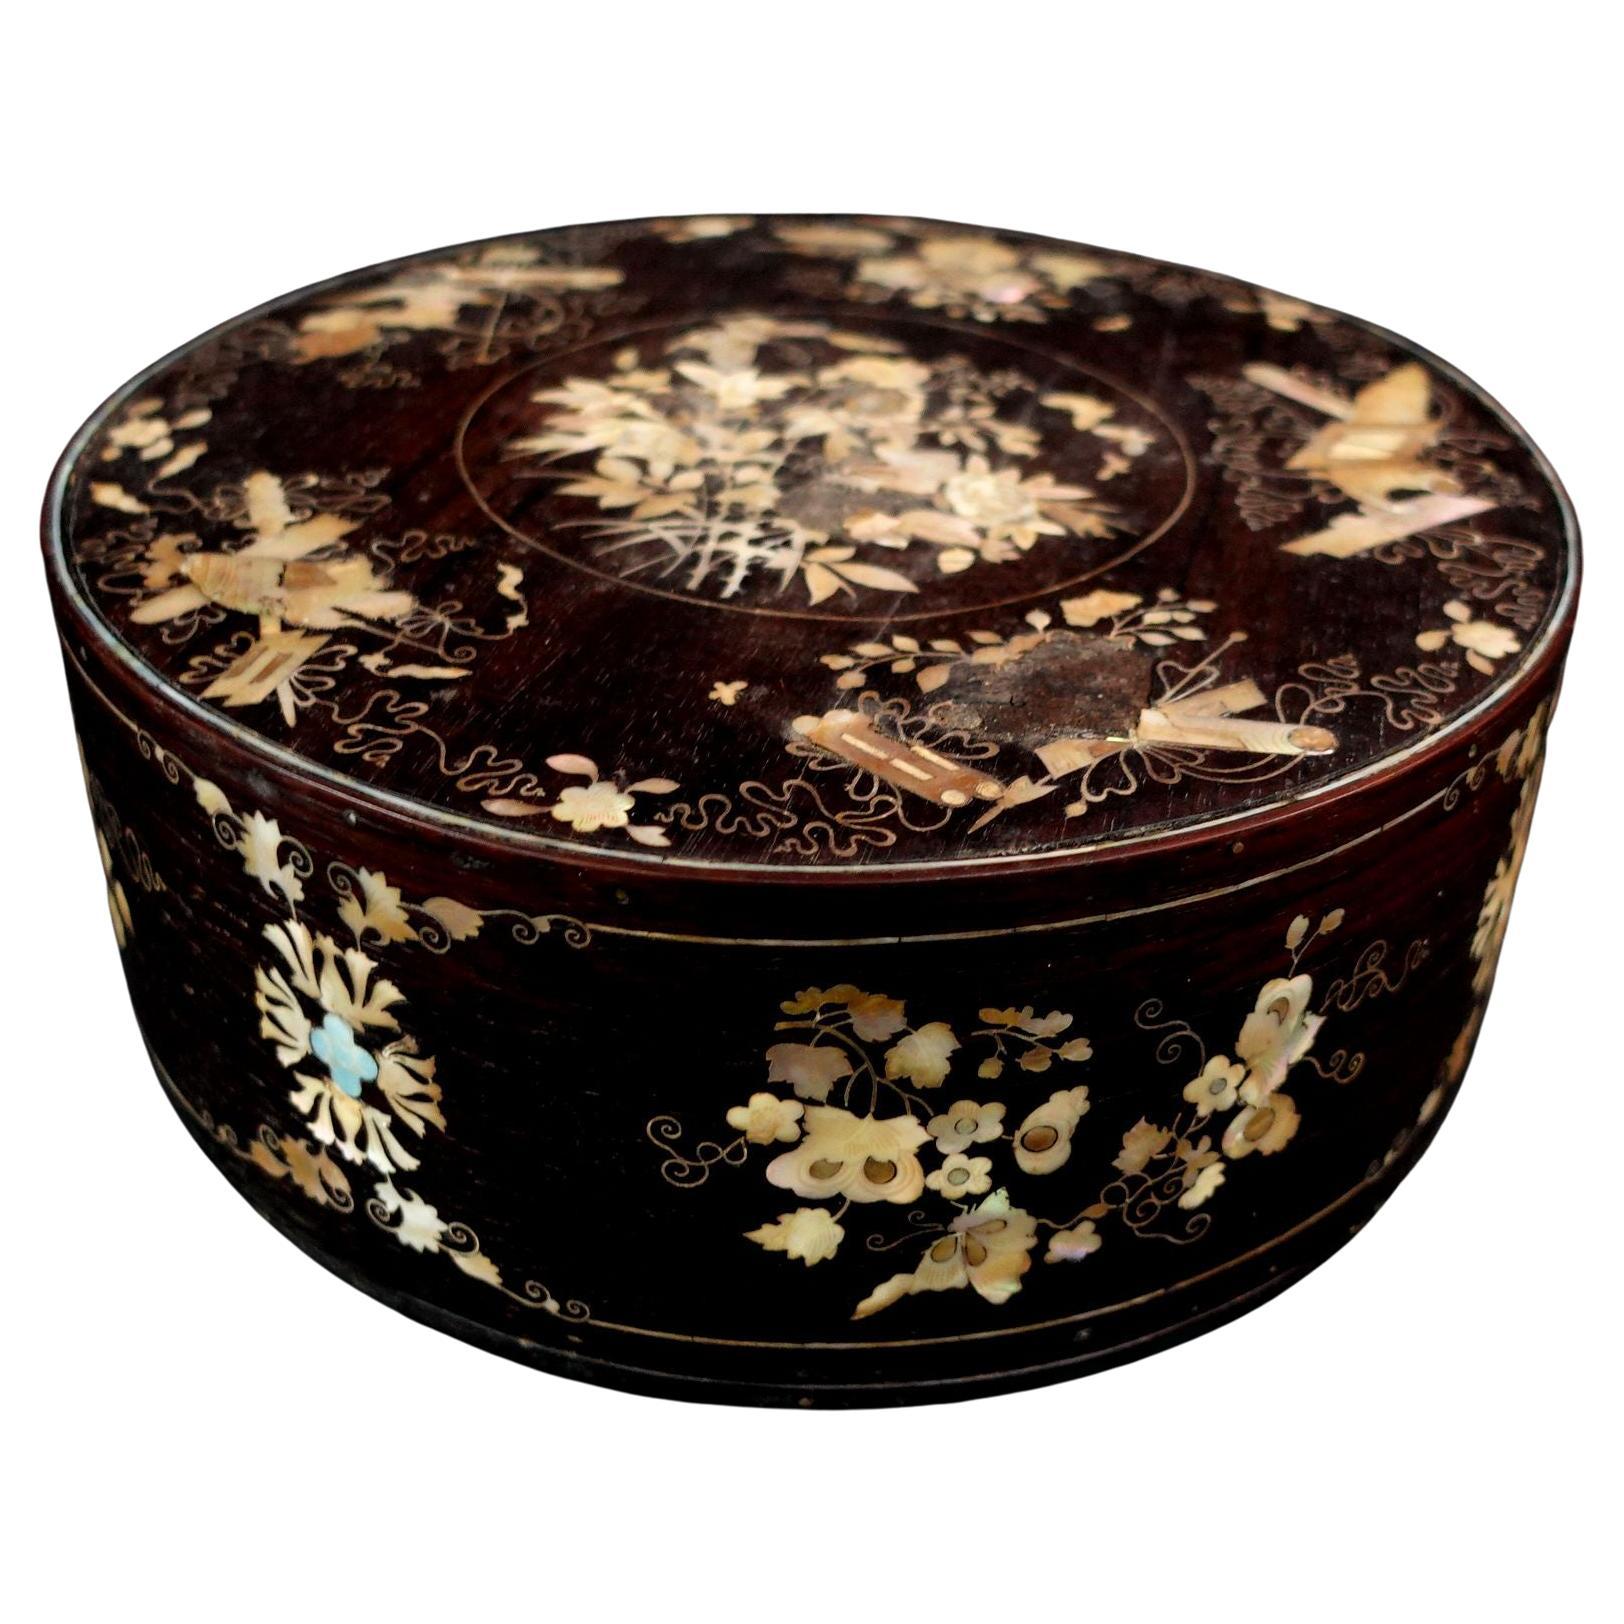 Large Japanese Mother of Pearl Inlaid Lacquered Box, Ric.063